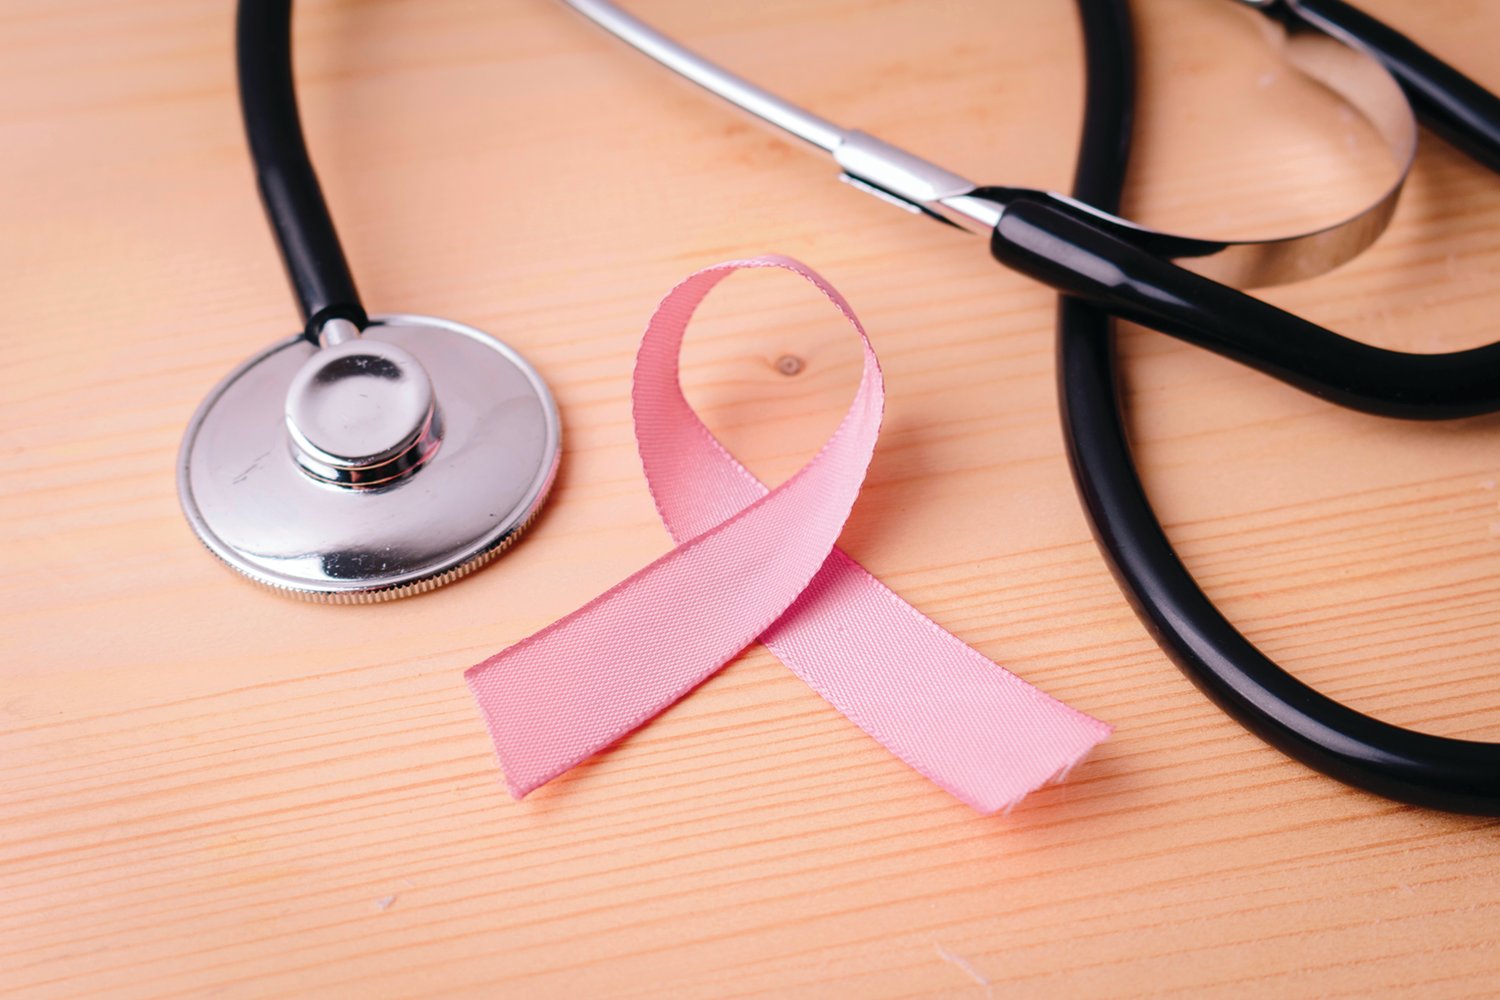 While breast cancer can affect just about any woman (as well as men), certain women are at higher risk for developing breast cancer than others. Such women include those with a family history of breast cancer and/or the presence of genetic markers called BRCA1 or BRCA2 gene mutations, according to the Bedford Breast Institute.